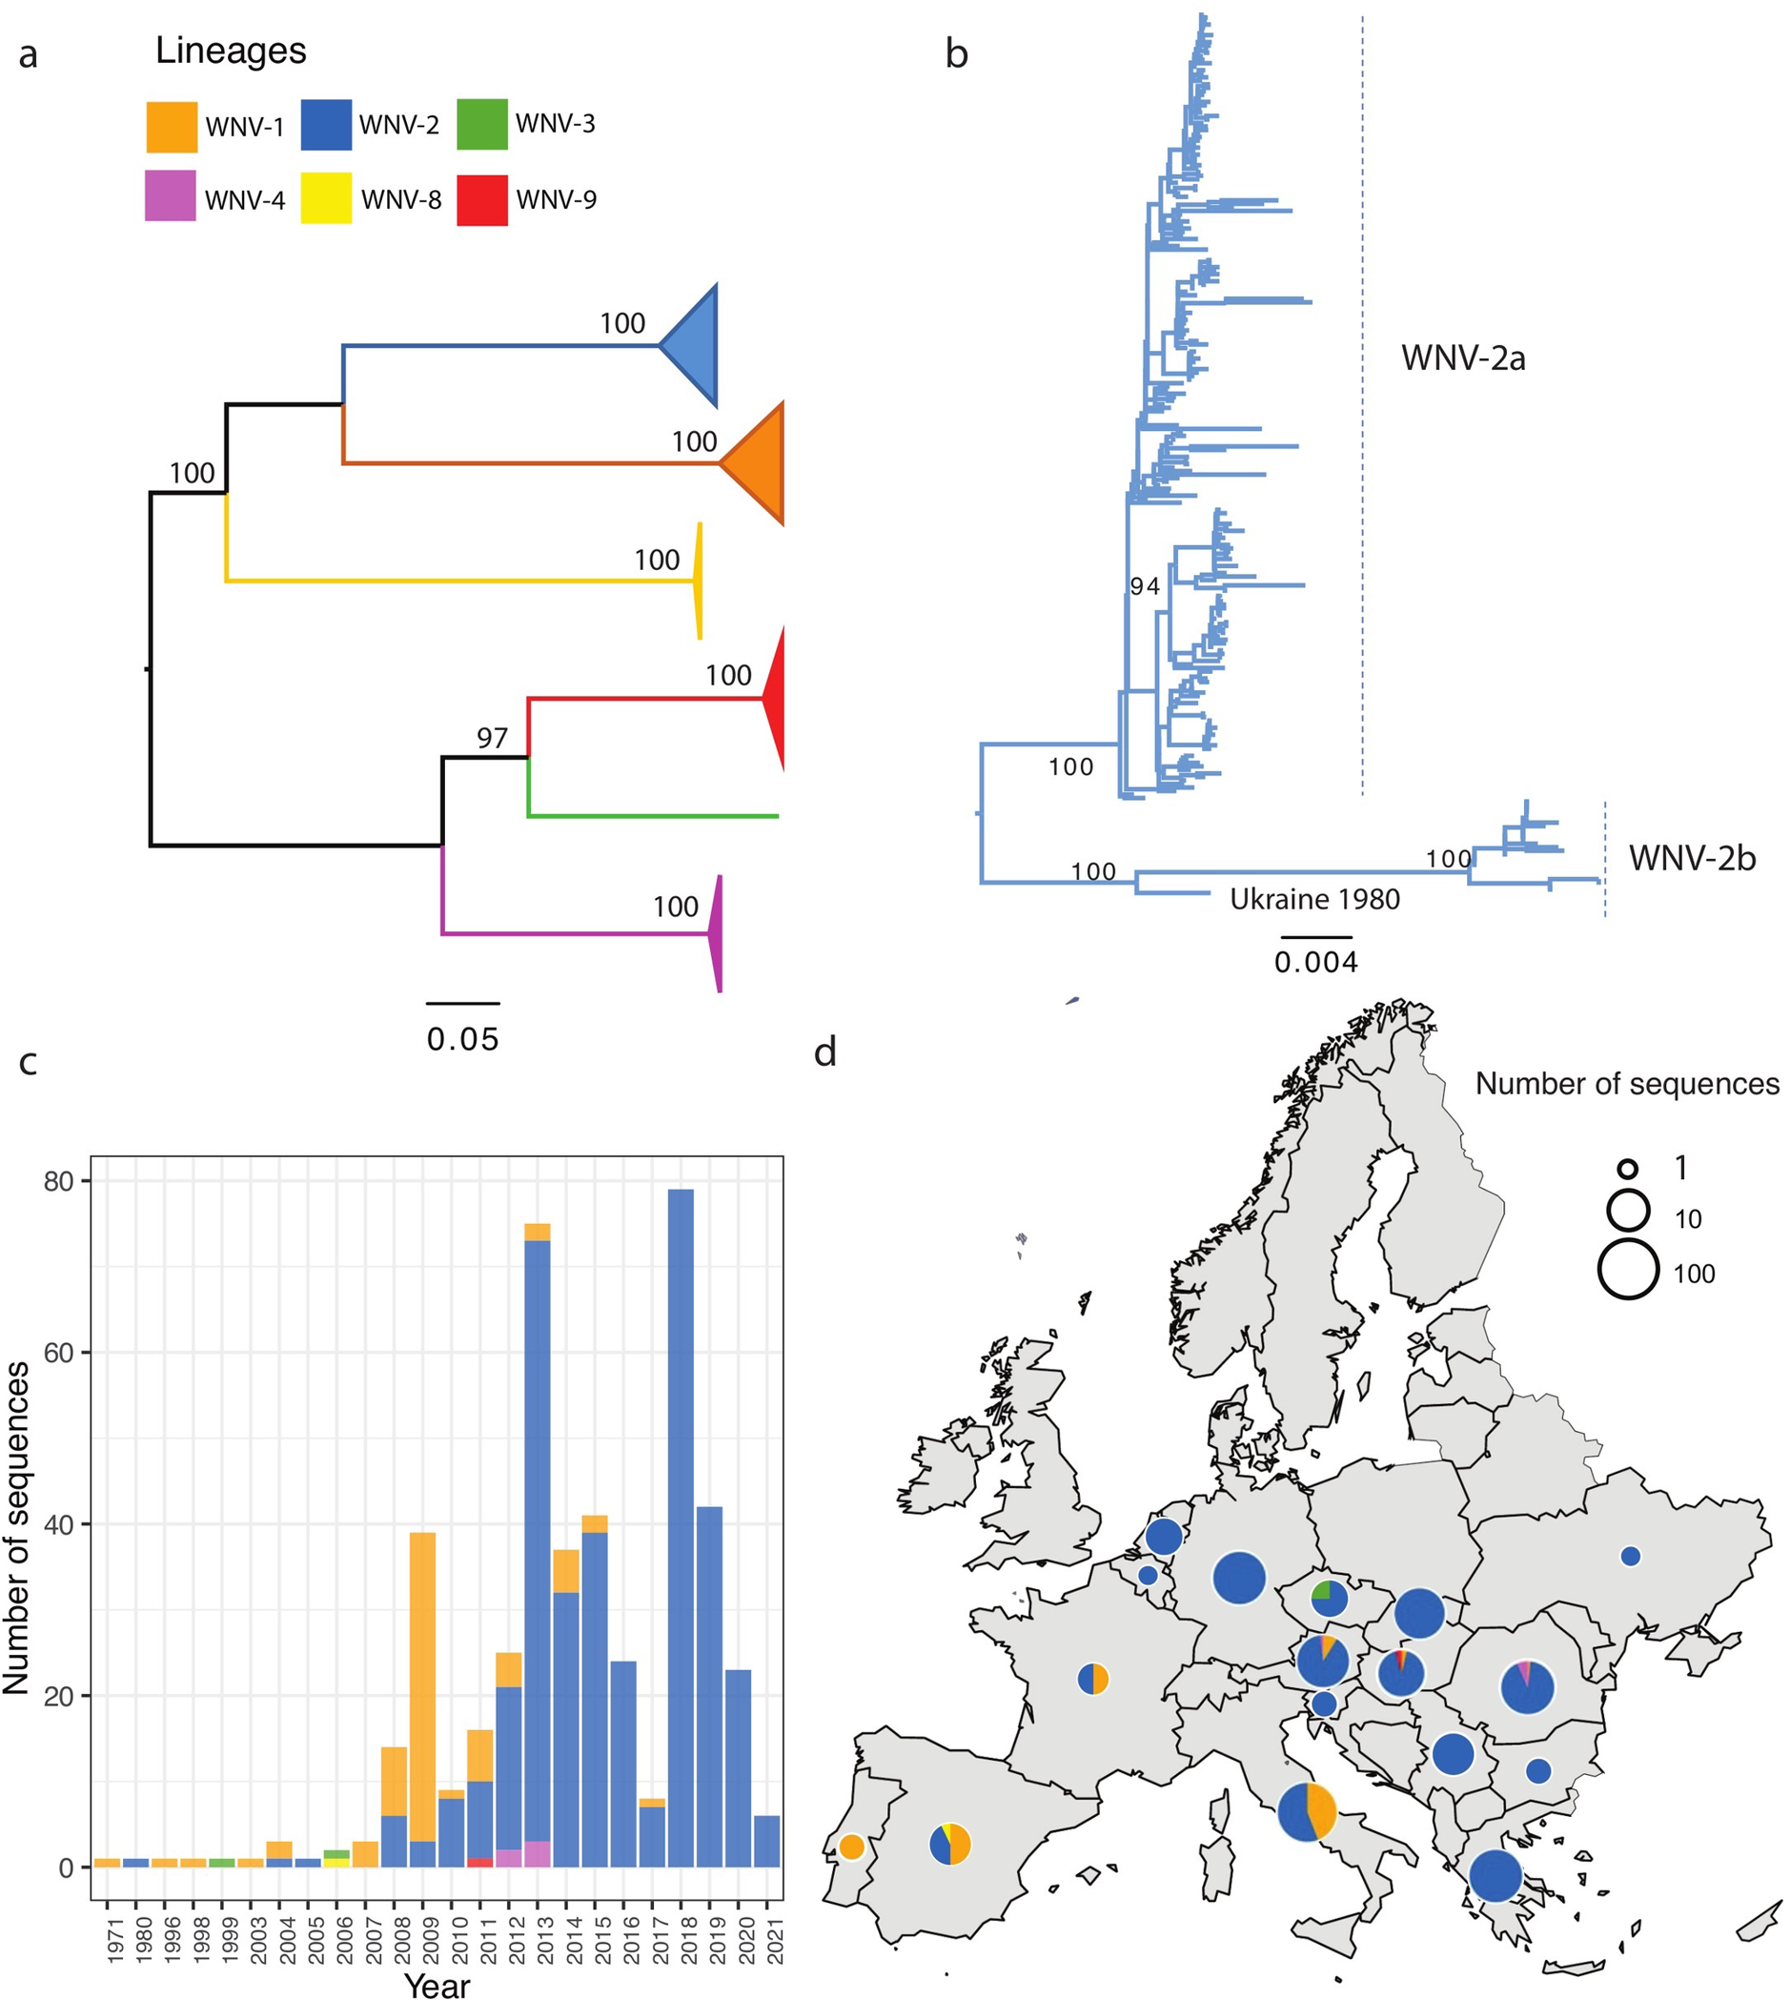 Phylogenetic analysis of WNV complete and partial nucleotide sequences identified from Europe.  Evolutionary distances were calculated using the optimal GTR+I model, with the phylogenetic tree constructed using the maximum likelihood (ML) method.  Bootstrap values ​​are given for 1000 replicates.  (a) ML trees of all genera found in Europe.  The branches of the lines are all collapsed and shown as rectangles;  (b) subtree of WNV-2 sequences;  (c) WNV lineage distribution over time using the same color as shown in the tree;  (d) Geographical distribution of WNV lineages.  Map with a small pie chart showing the total number of sequences detected in each country (on a logarithmic scale), with each slice proportional to the number of distinct WNV lineages within that country.  The European shapefile used in the study was obtained from Data & Maps for ArcGIS (formerly Esri Data & Maps, https://www.arcgis.com/home/group.html?id=24838c2d95e14dd18c25e9bad55a7f82#overview) under a CC4B0Y.  License.